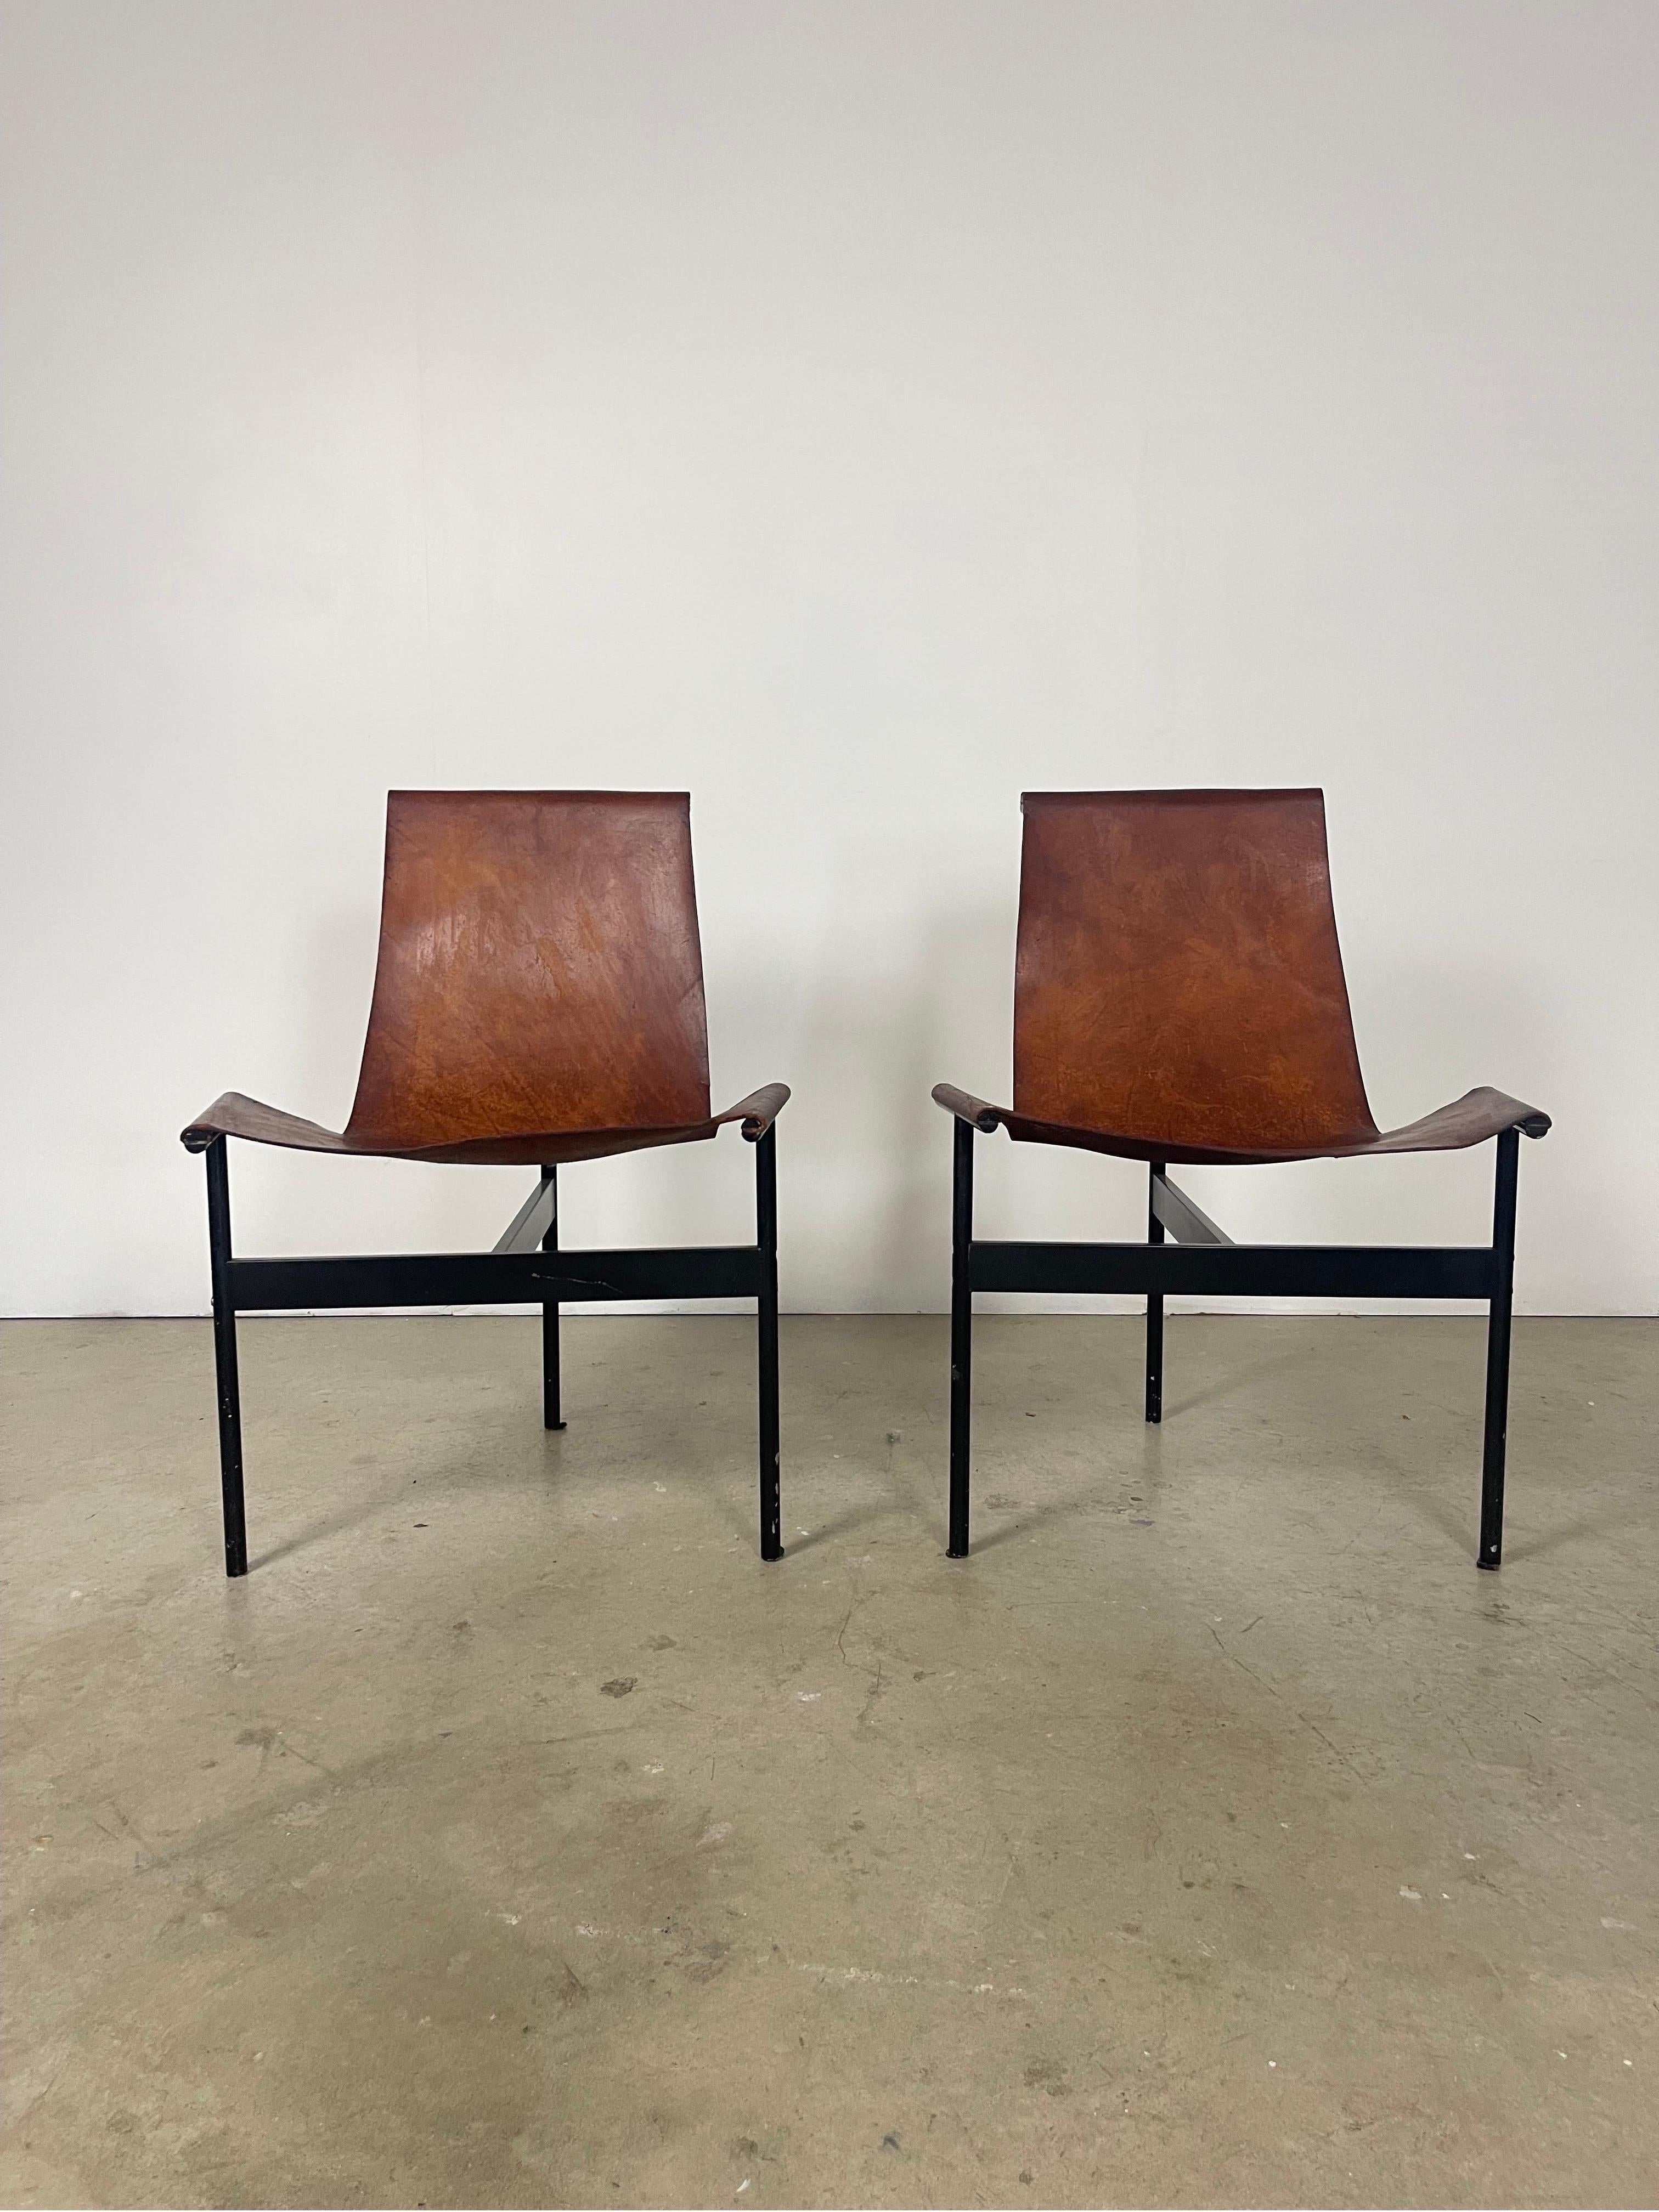 American Pair of T Side Chairs by Katavalos, Littell, and Kelly for Laverne International